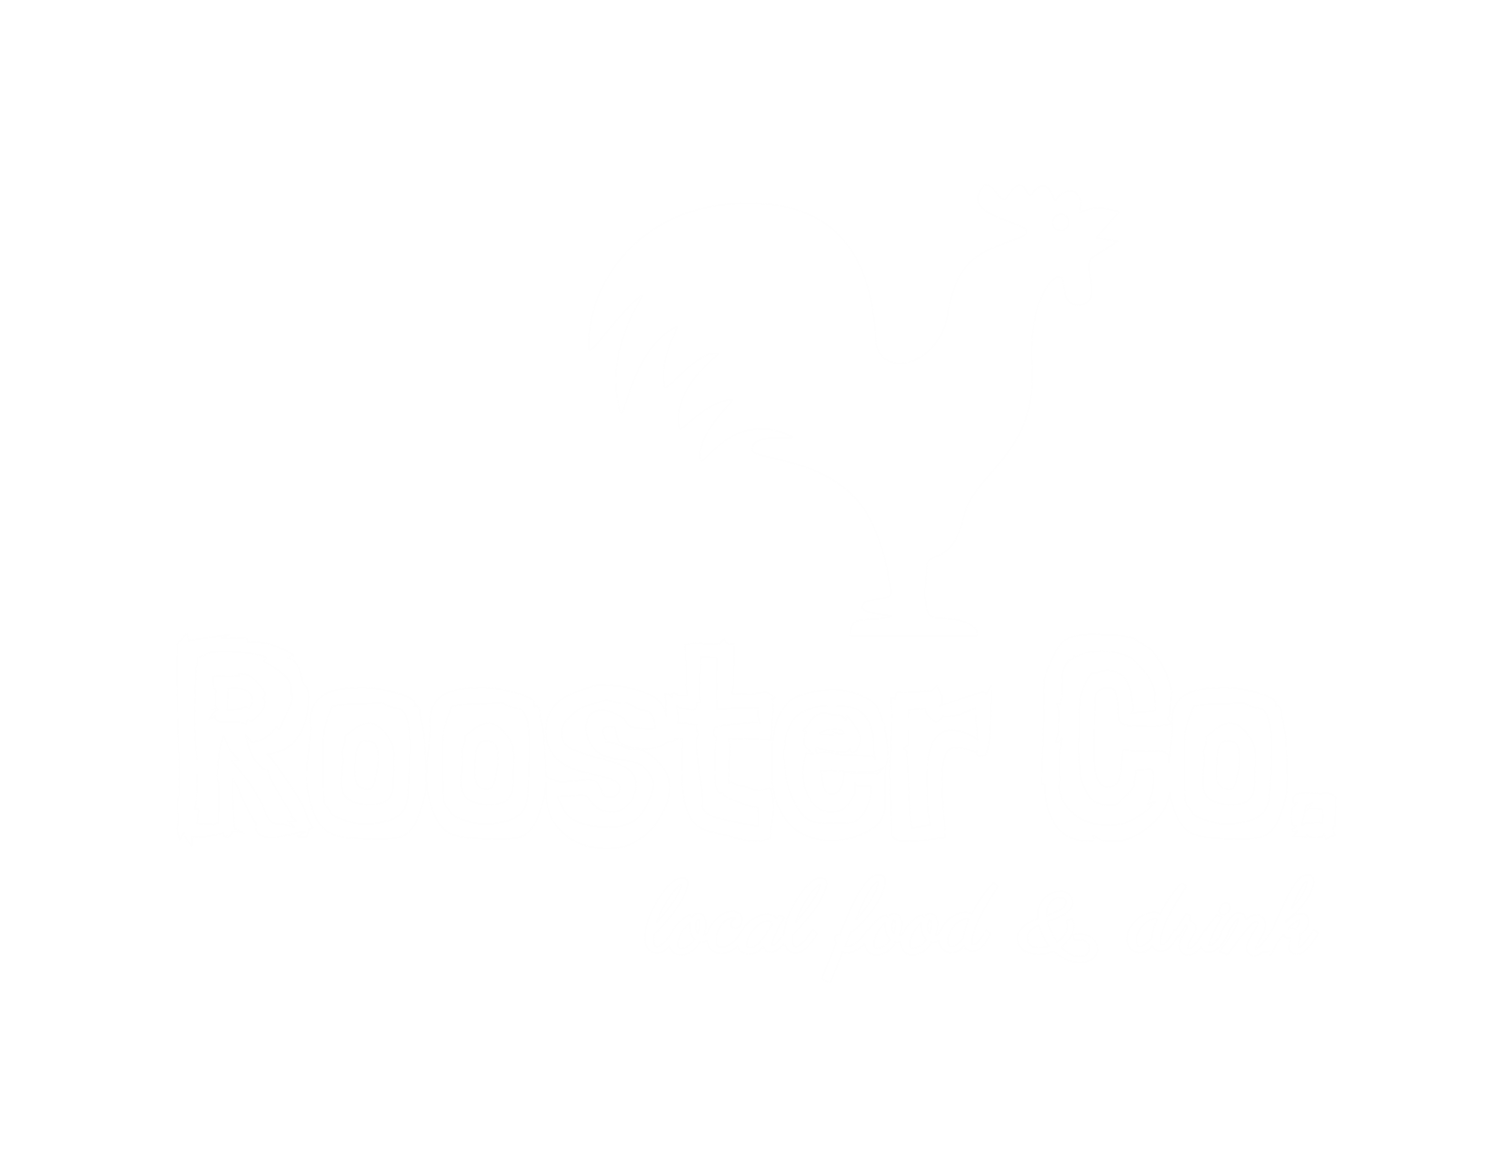 Black and White Rooster Logo - Rooster Co. Rooster Co